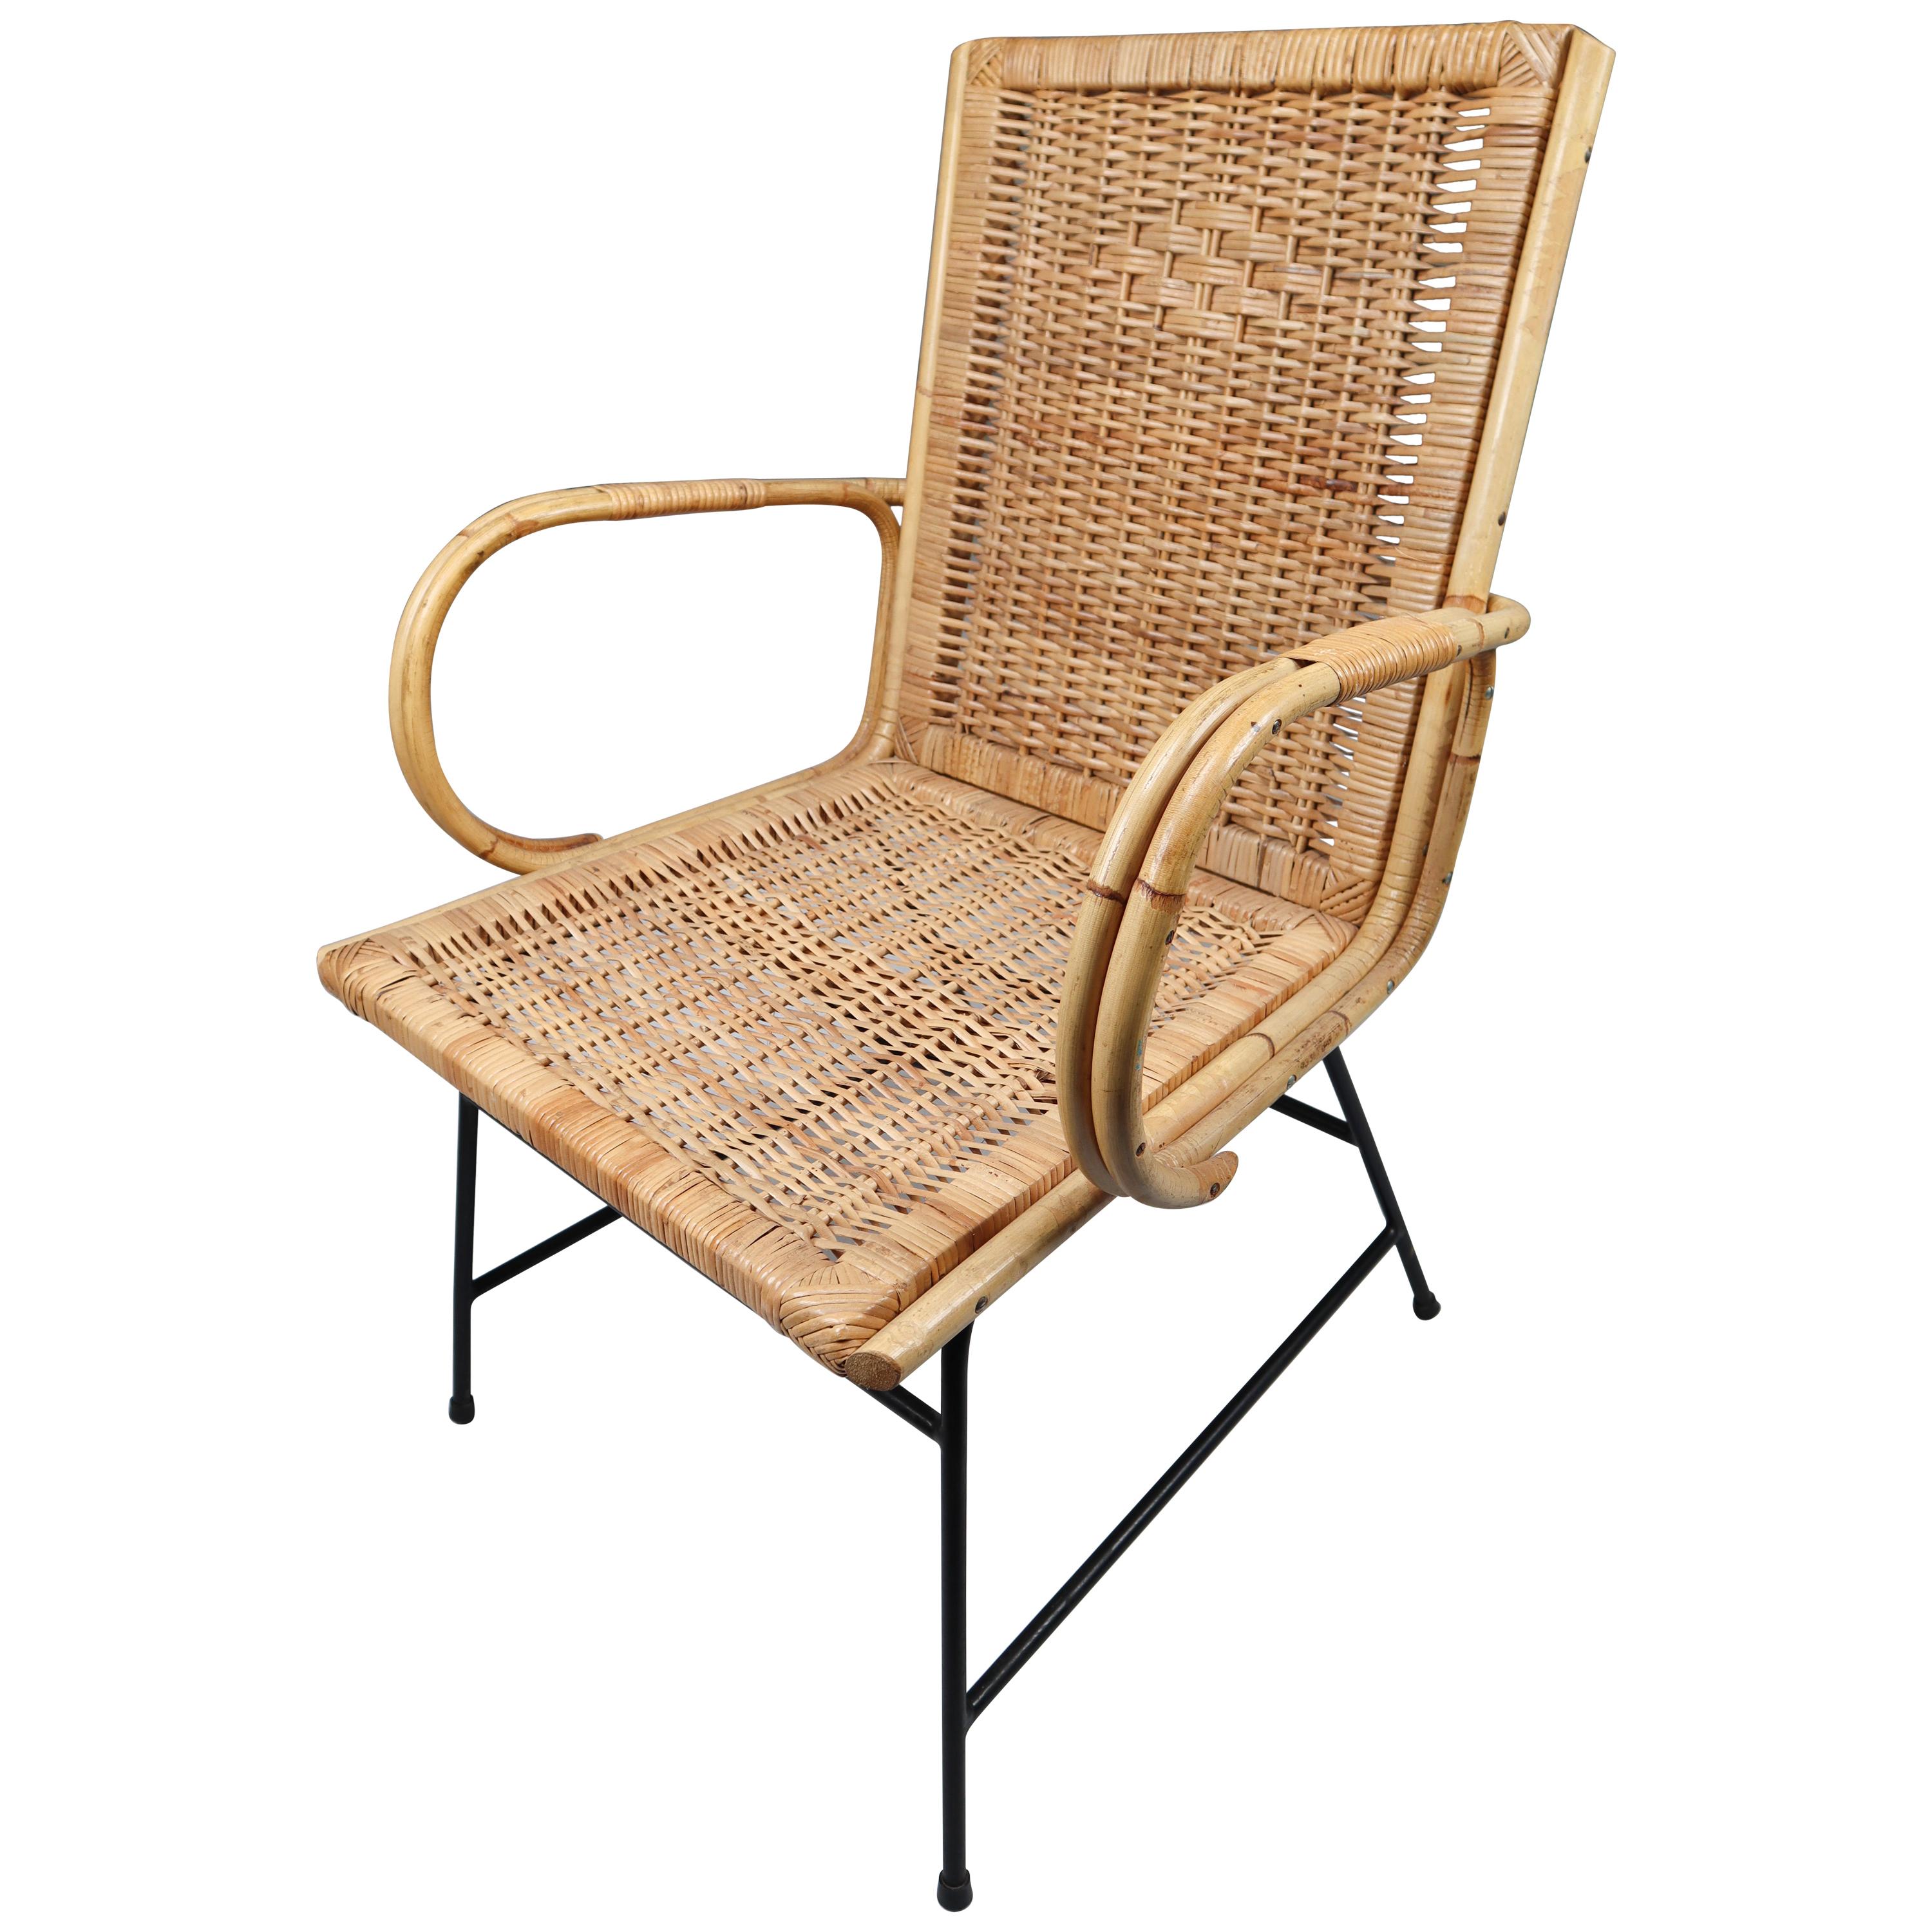 Wicker Midcentury Armchair Designed and Produced in France, 1960s